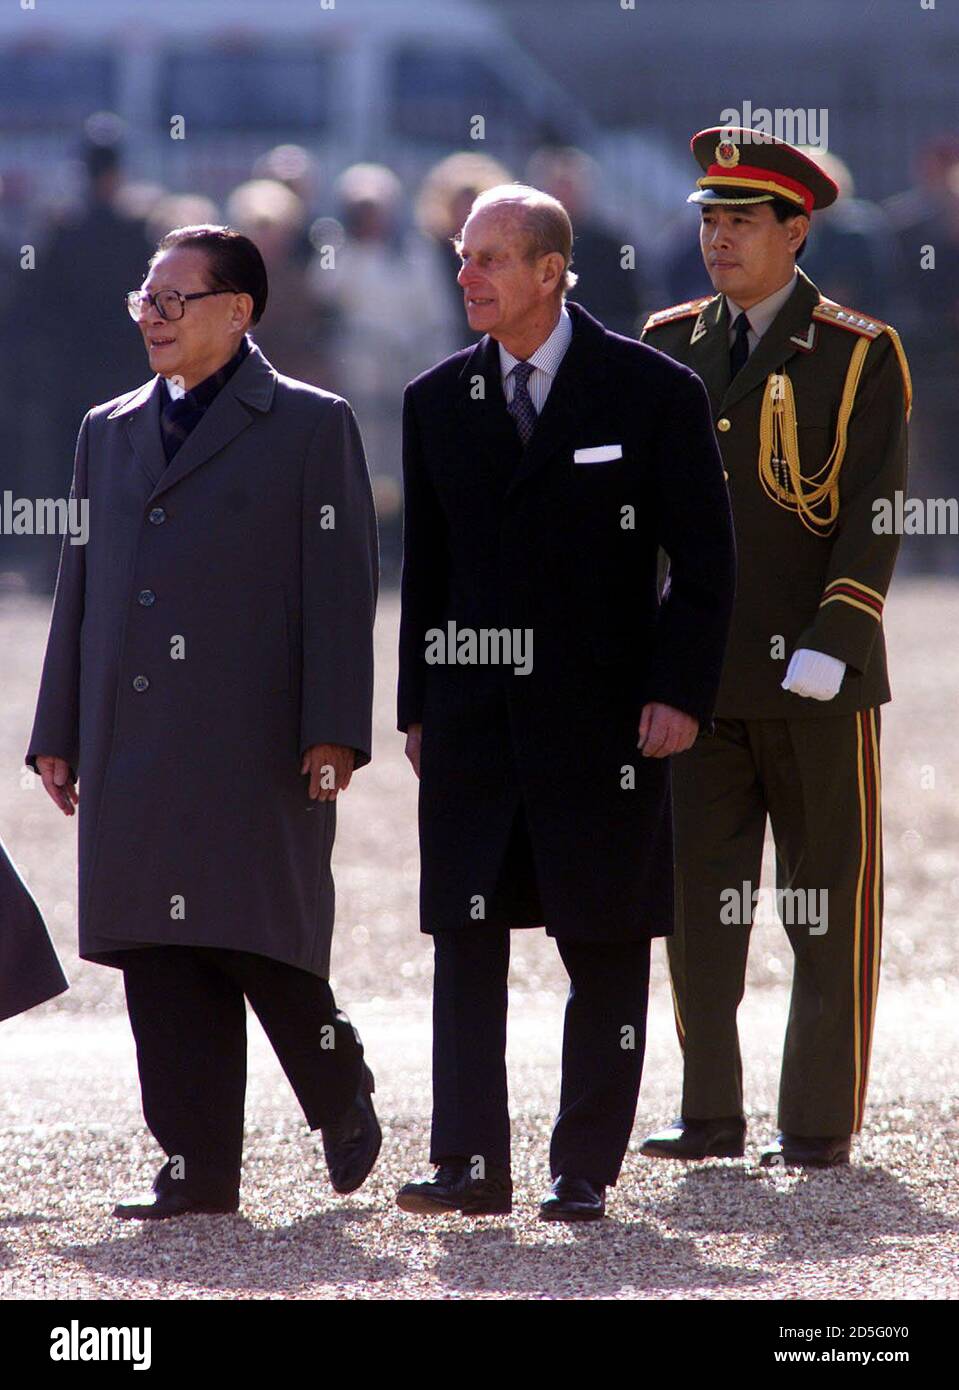 China's President Jiang Zemin (L) is escorted by Prince Philip (C) as he inspects a guard of honour at the start of his state visit to Britain, October 19. Protestors including Tibetan independence activists and human rights campaigners have threatened to dog Jiang's visit, the first by a Chinese head of state.  PH/HP Stock Photo